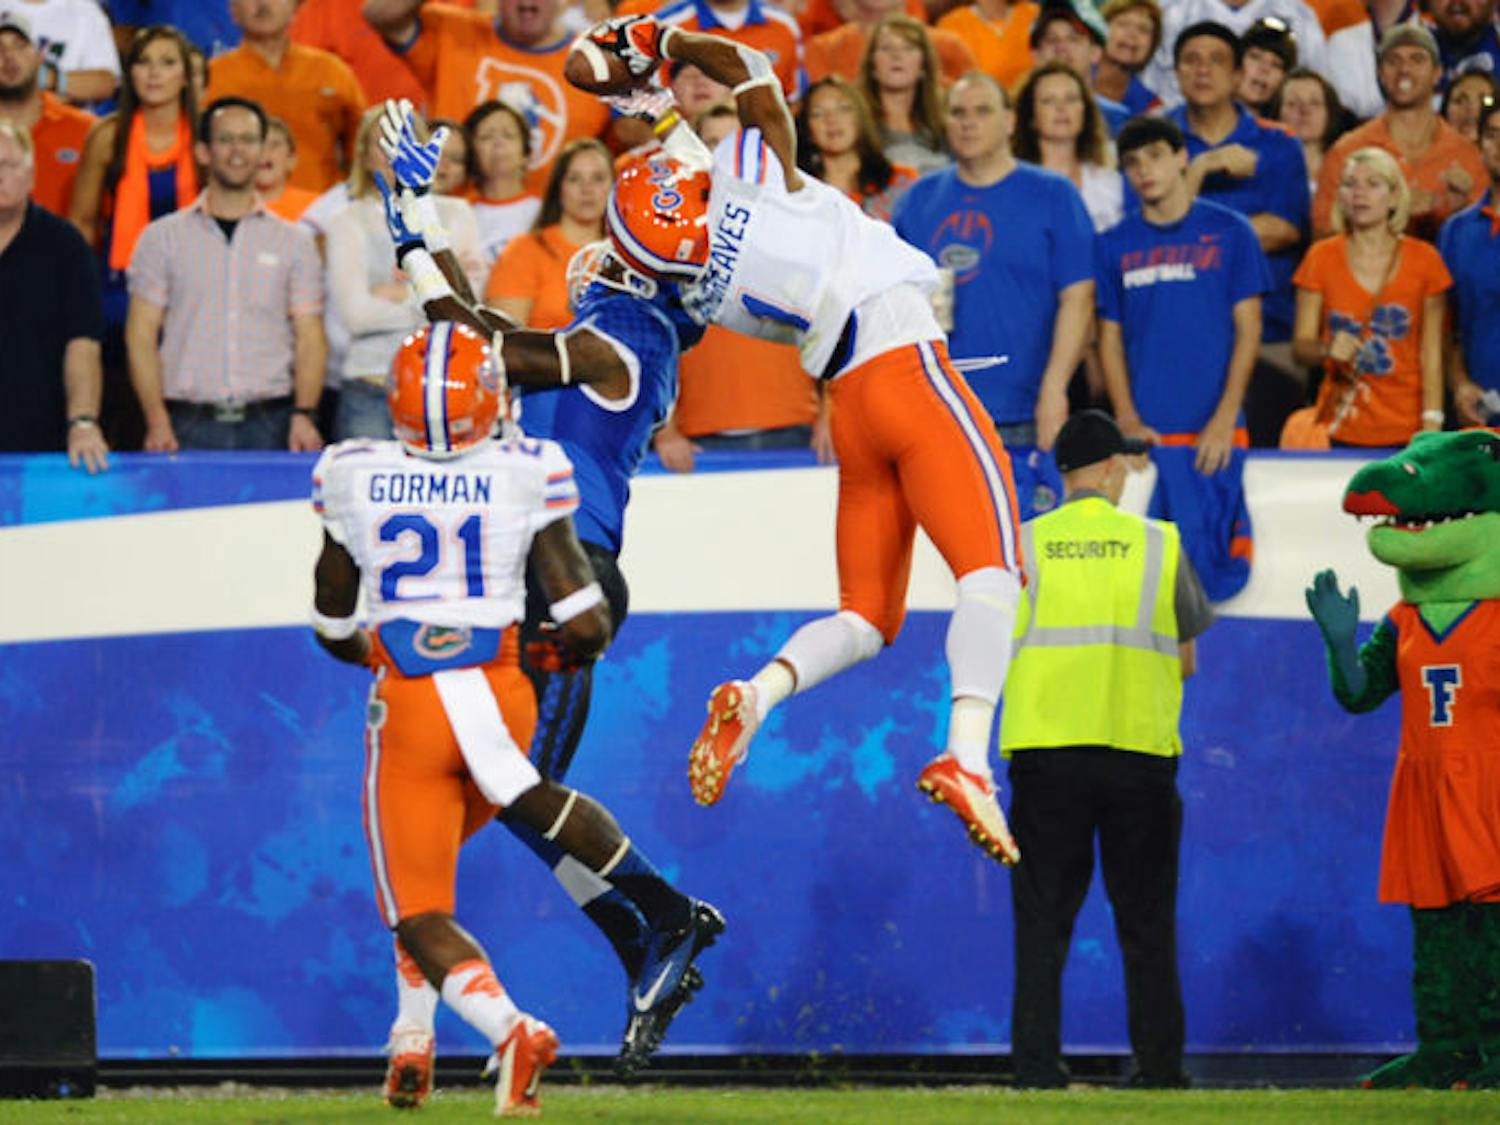 Vernon Hargreaves III intercepts a pass in the end zone during Florida’s 24-7 victory on Sept. 28, 2013, at Commonwealth Stadium in Lexington, Ky.